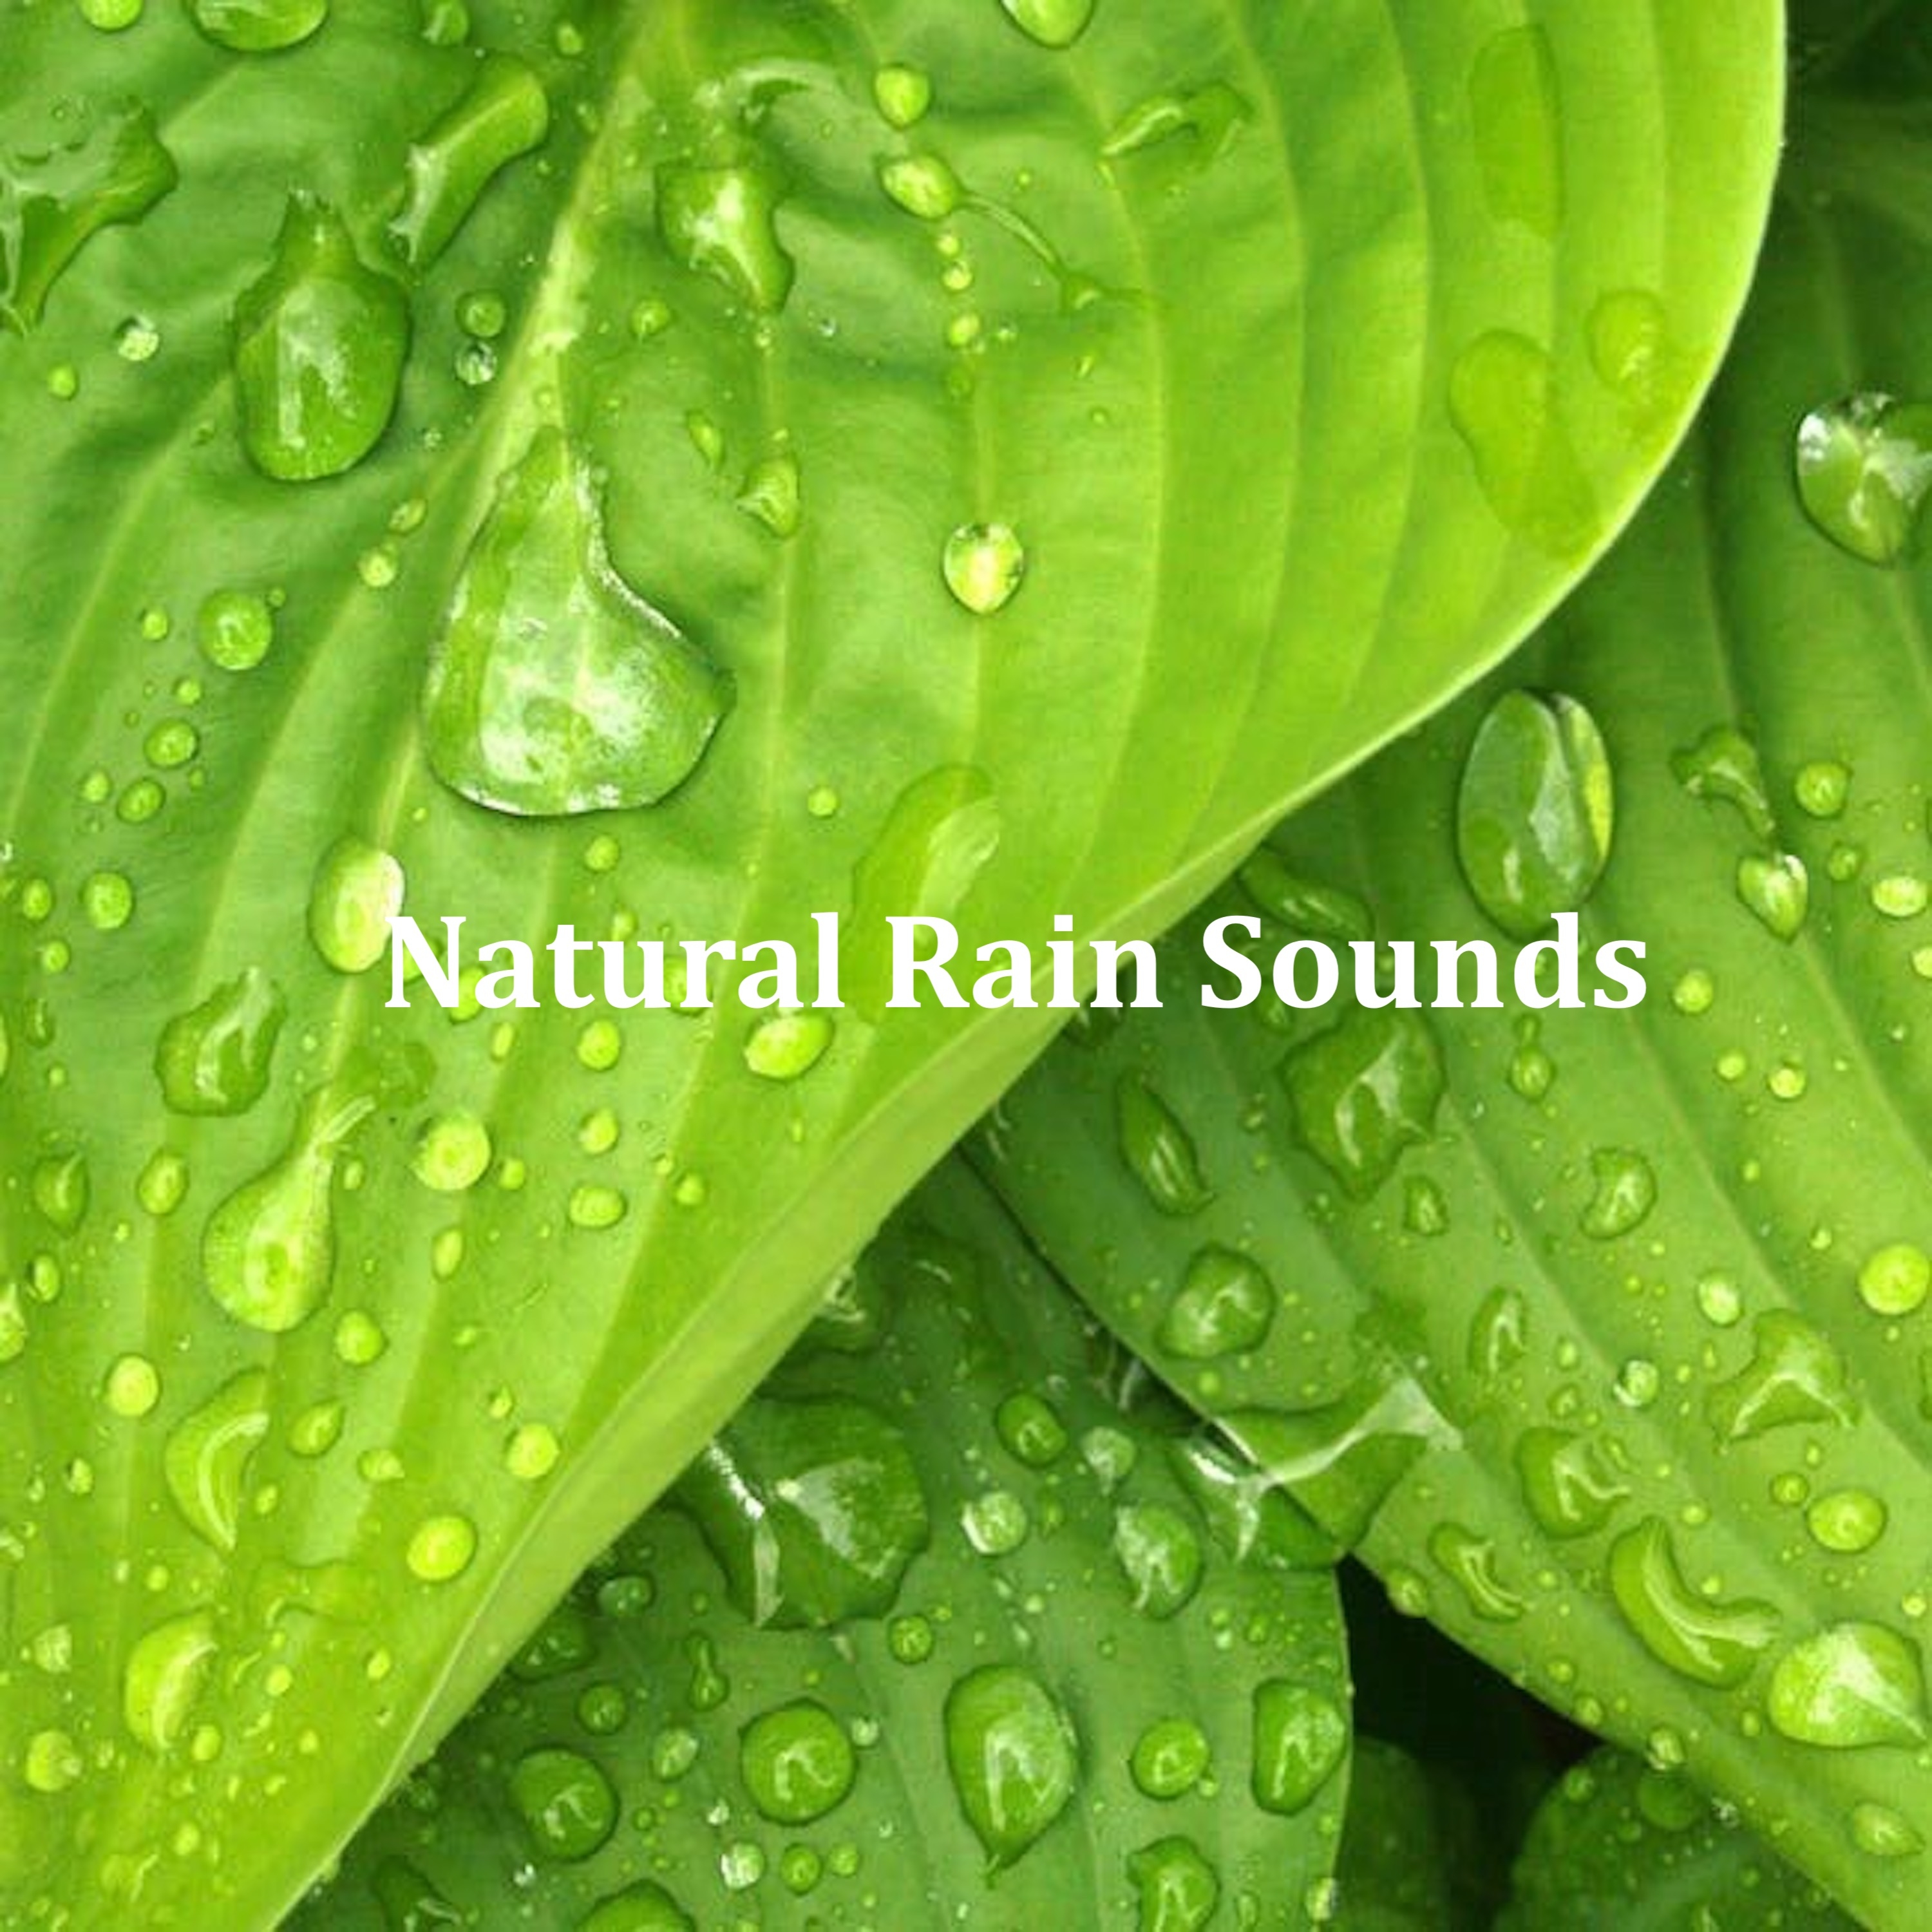 16 Ambient Rain Sounds: Natural Sounds for Stress Relief, Sleep, Anxiety and Wellbeing